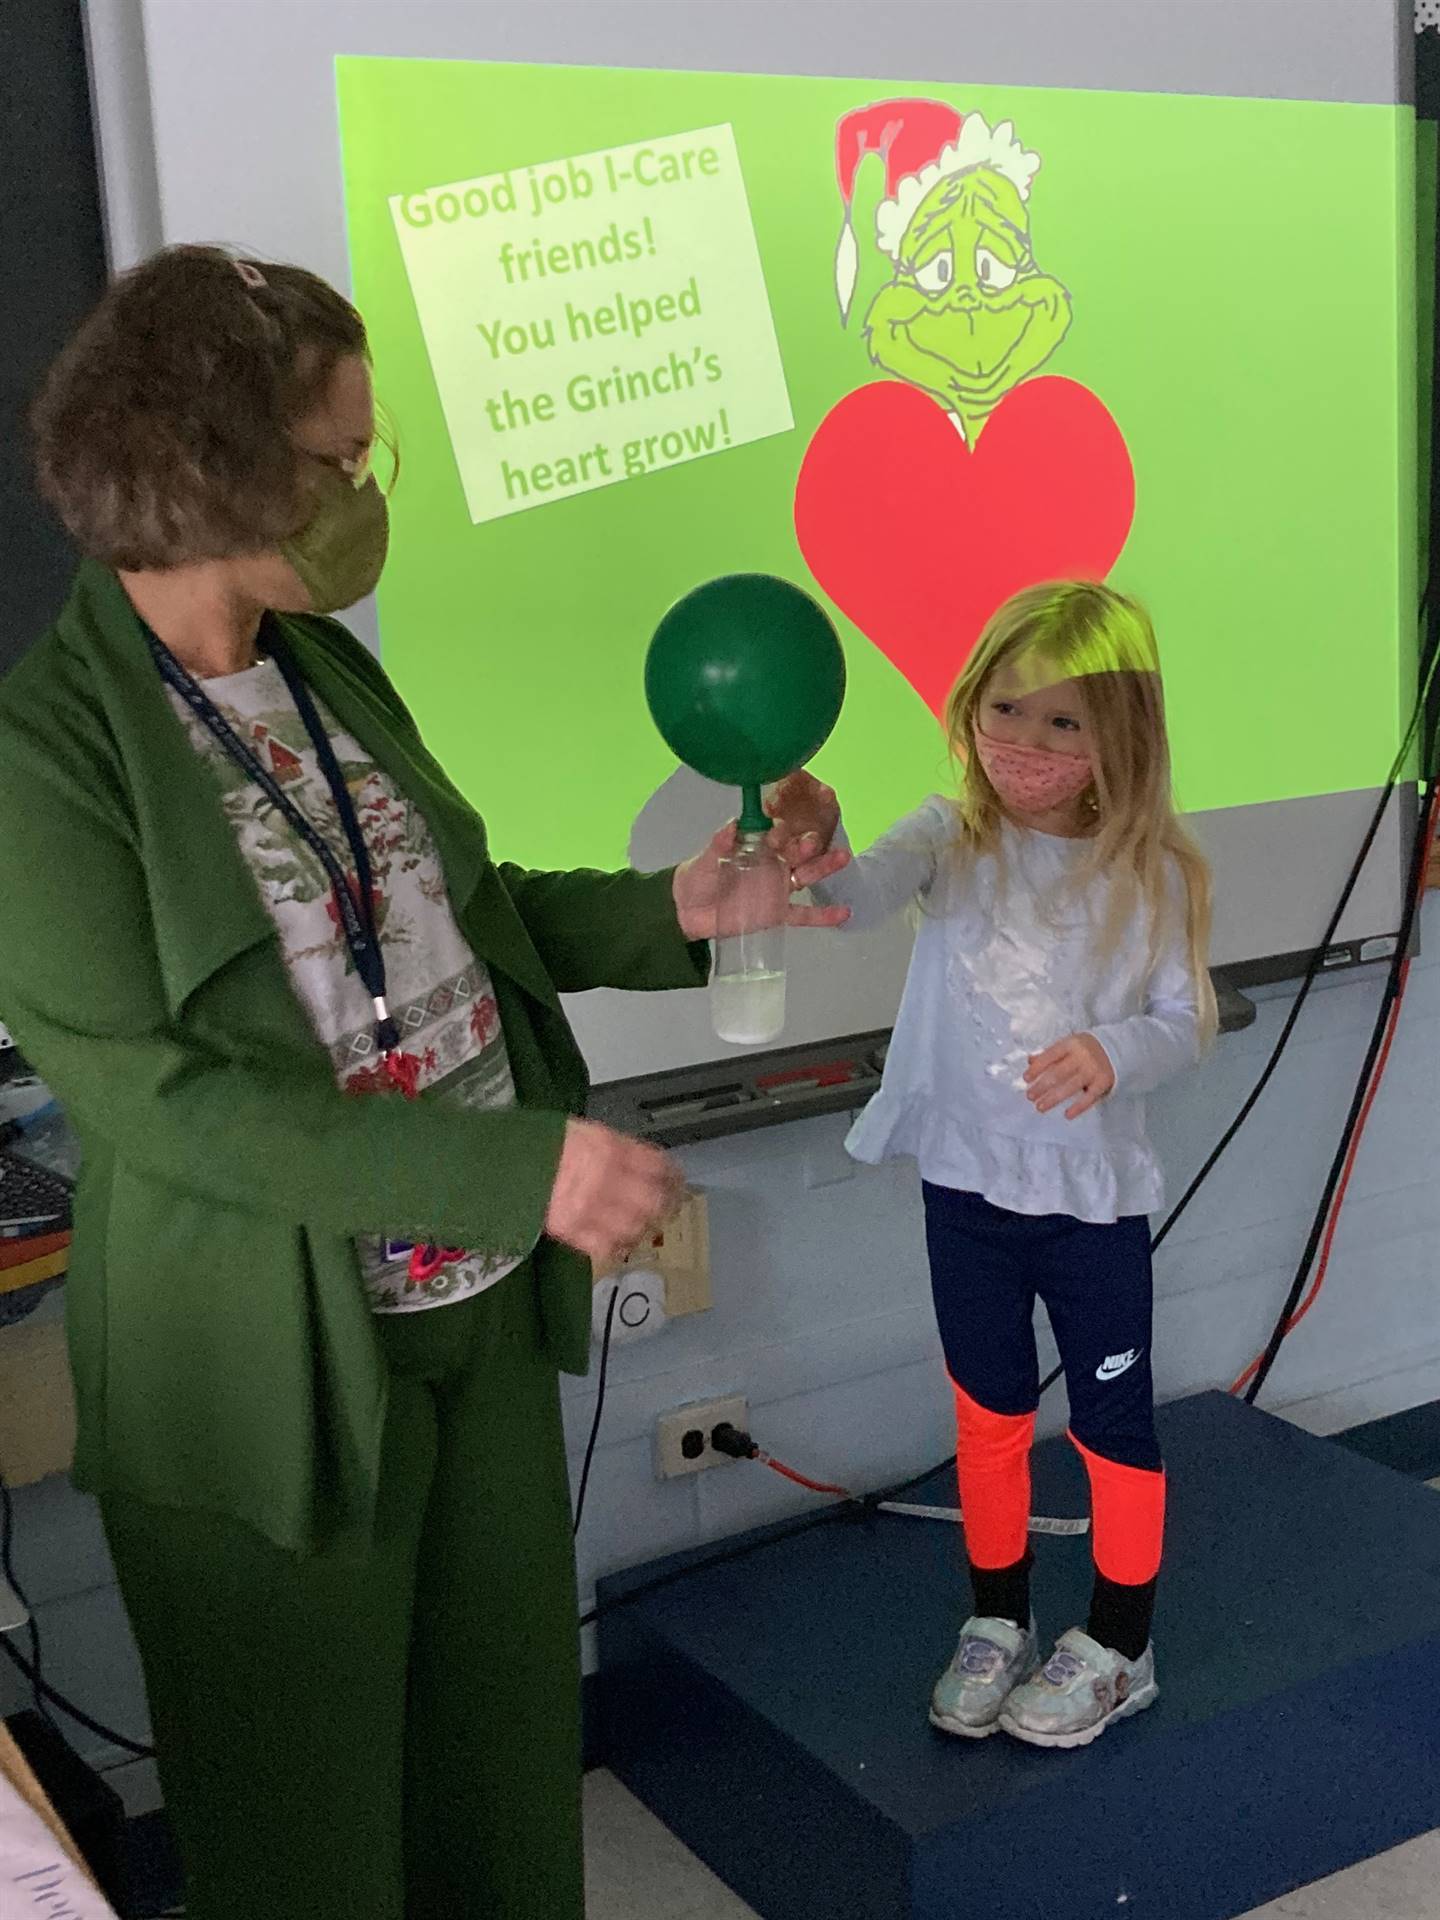 adult and student holding green balloon with grinch face and heart in background.